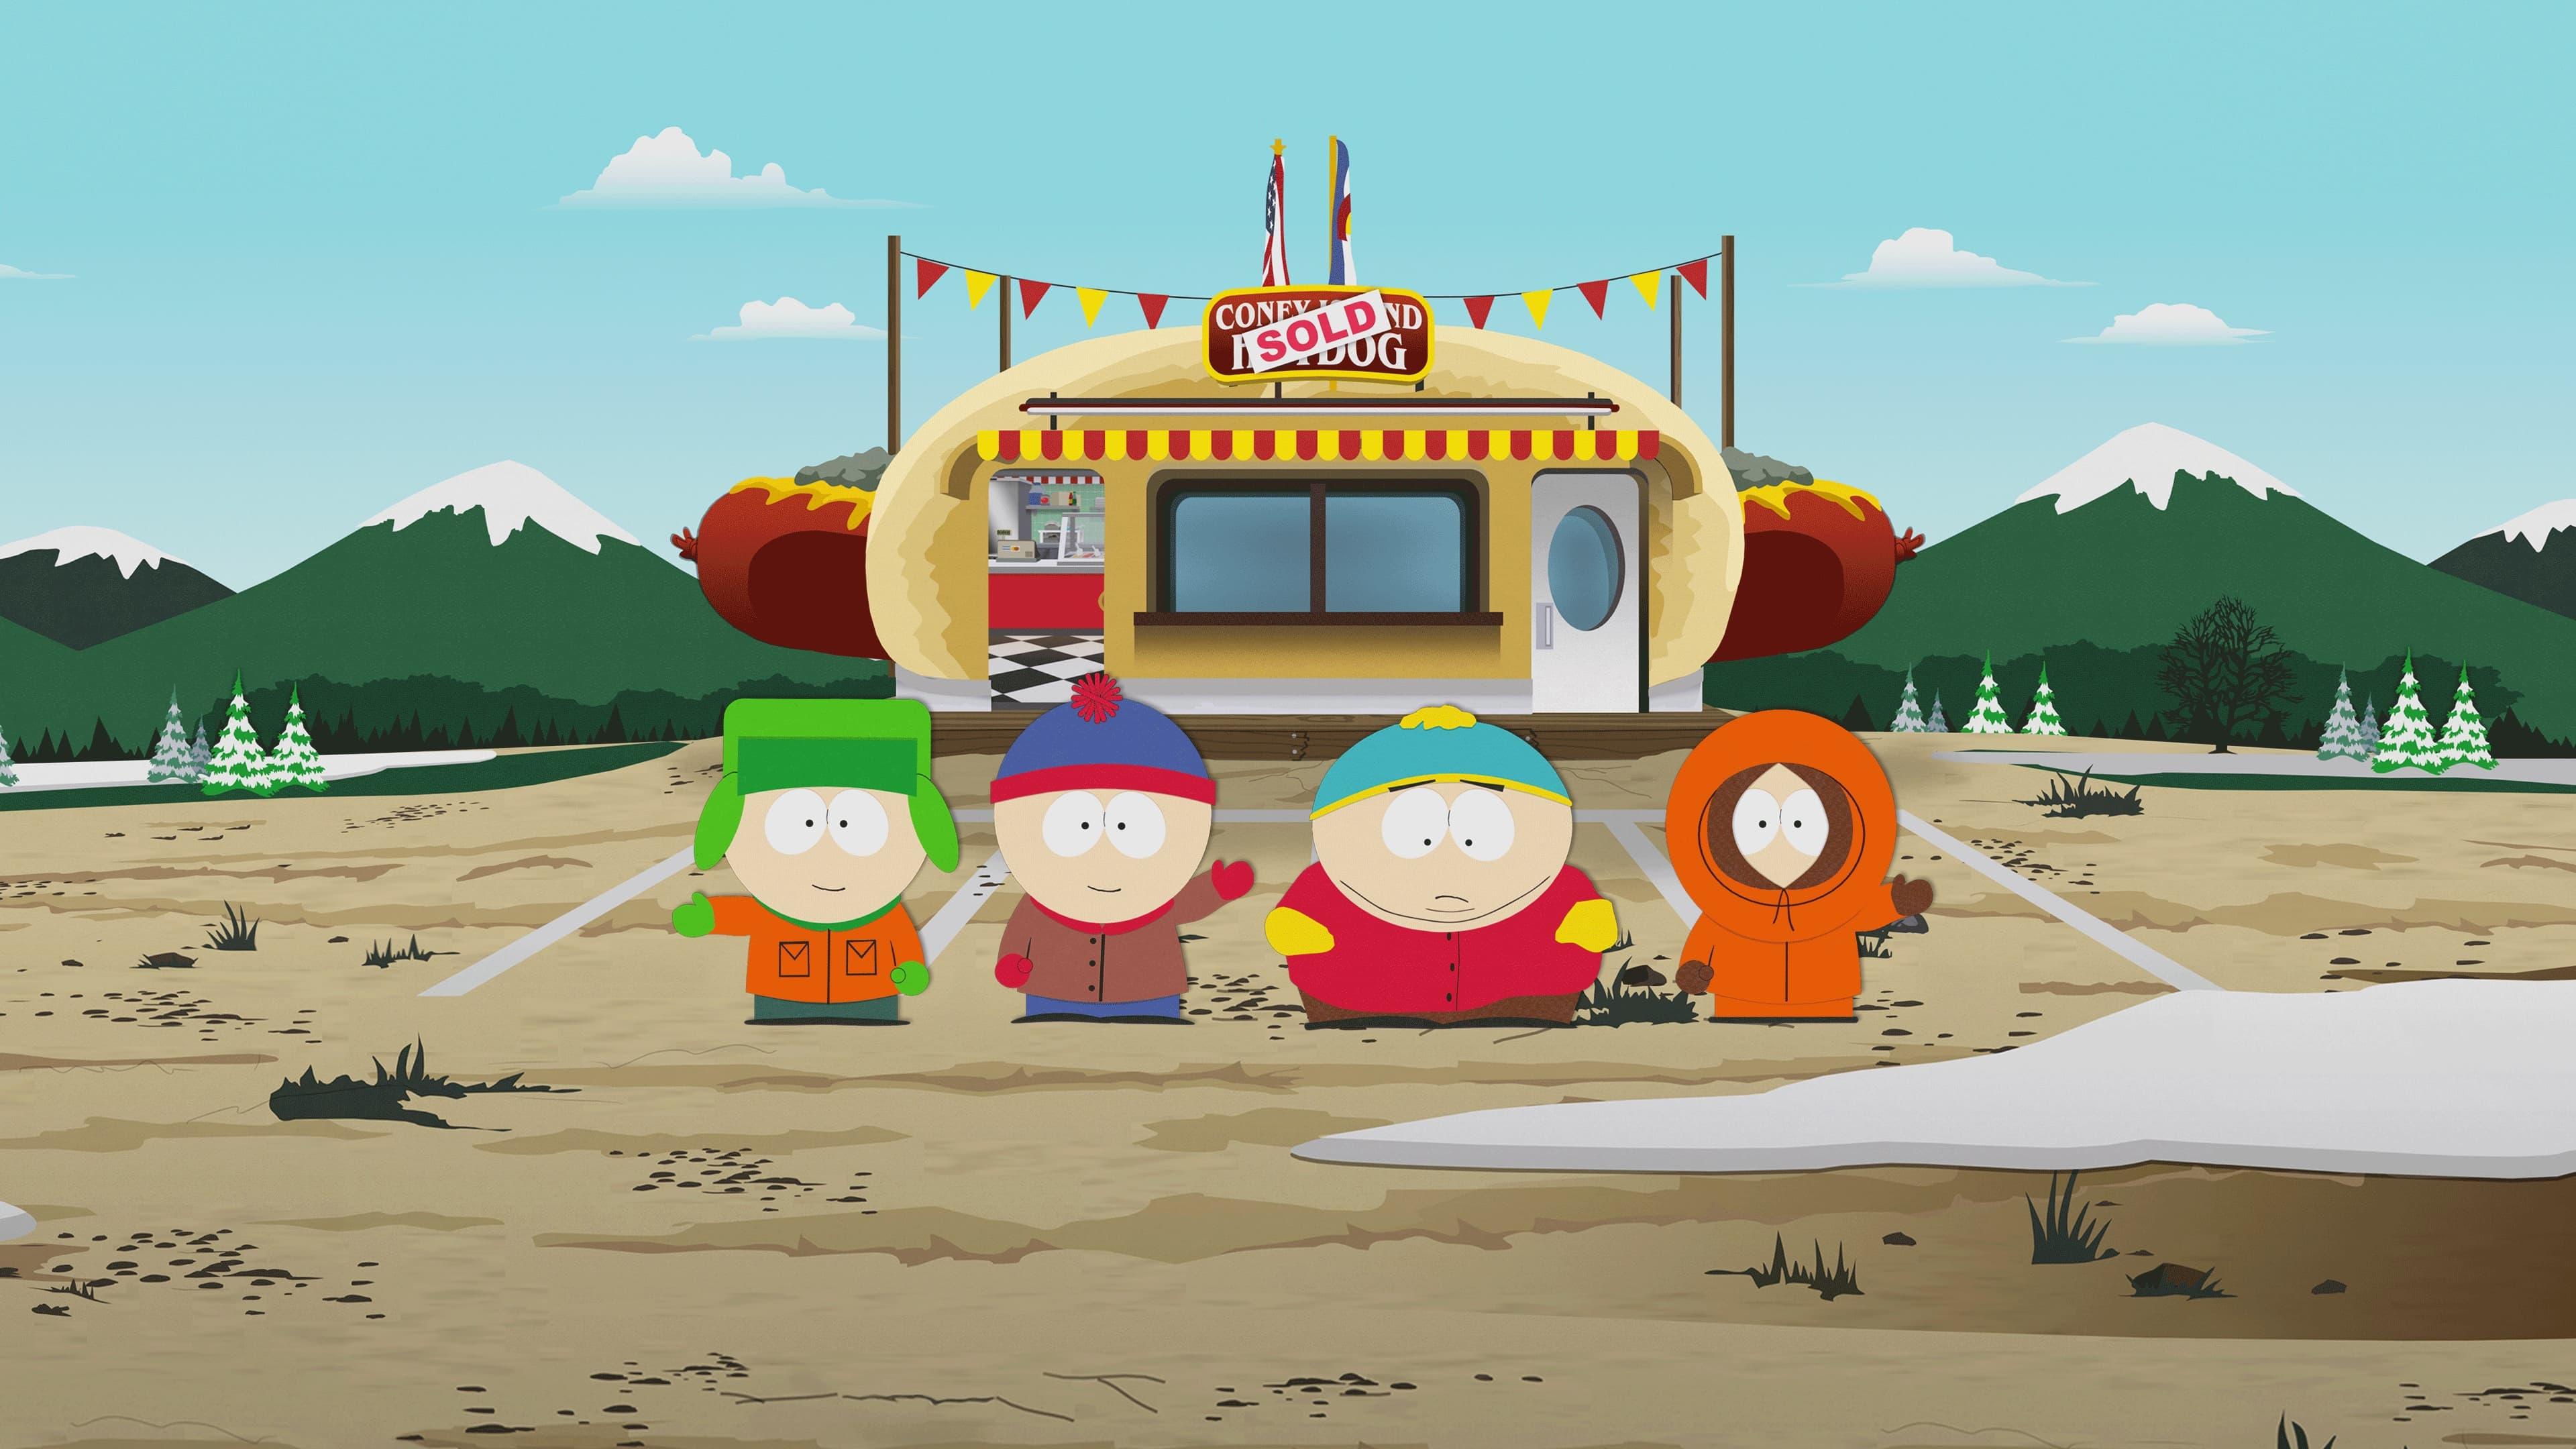 South Park the Streaming Wars backdrop